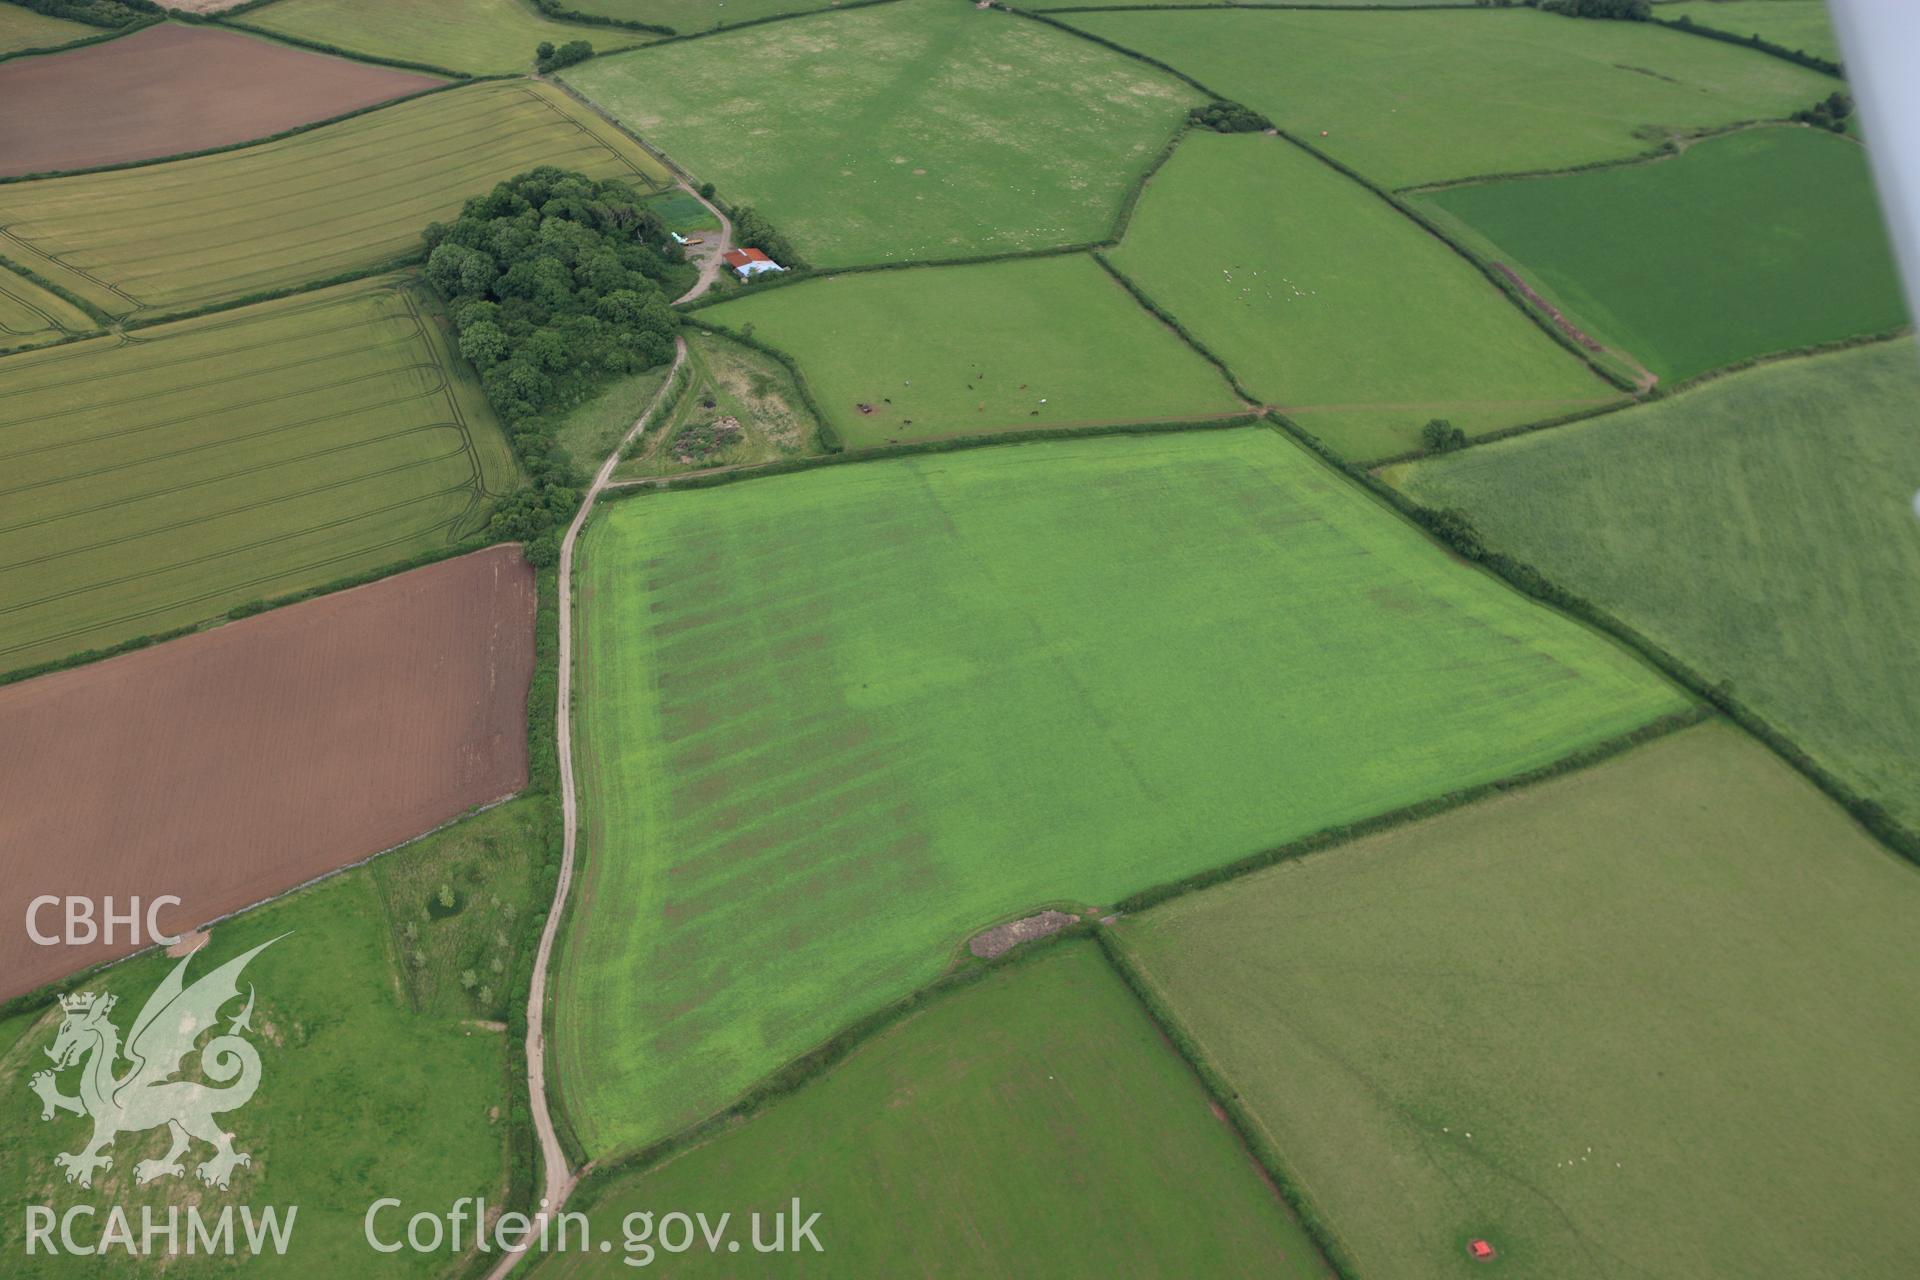 RCAHMW colour oblique aerial photograph of Corntown Enclosure. Taken on 09 July 2009 by Toby Driver